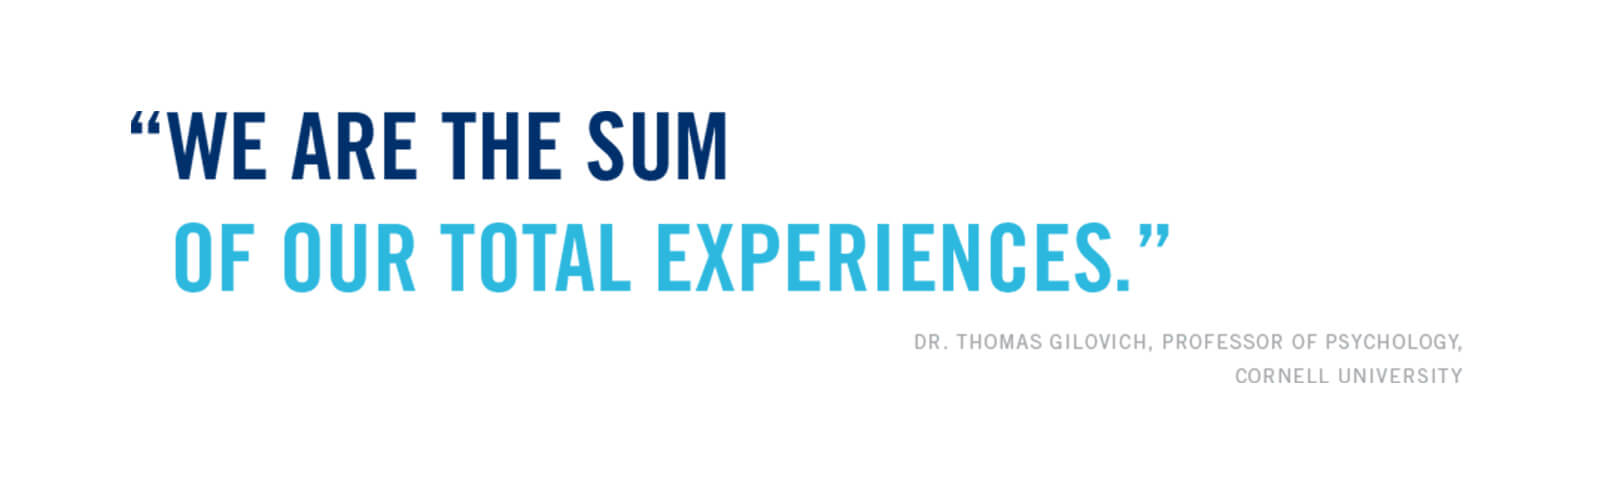 we are the sum of our total experiences - dr thomas gilovich